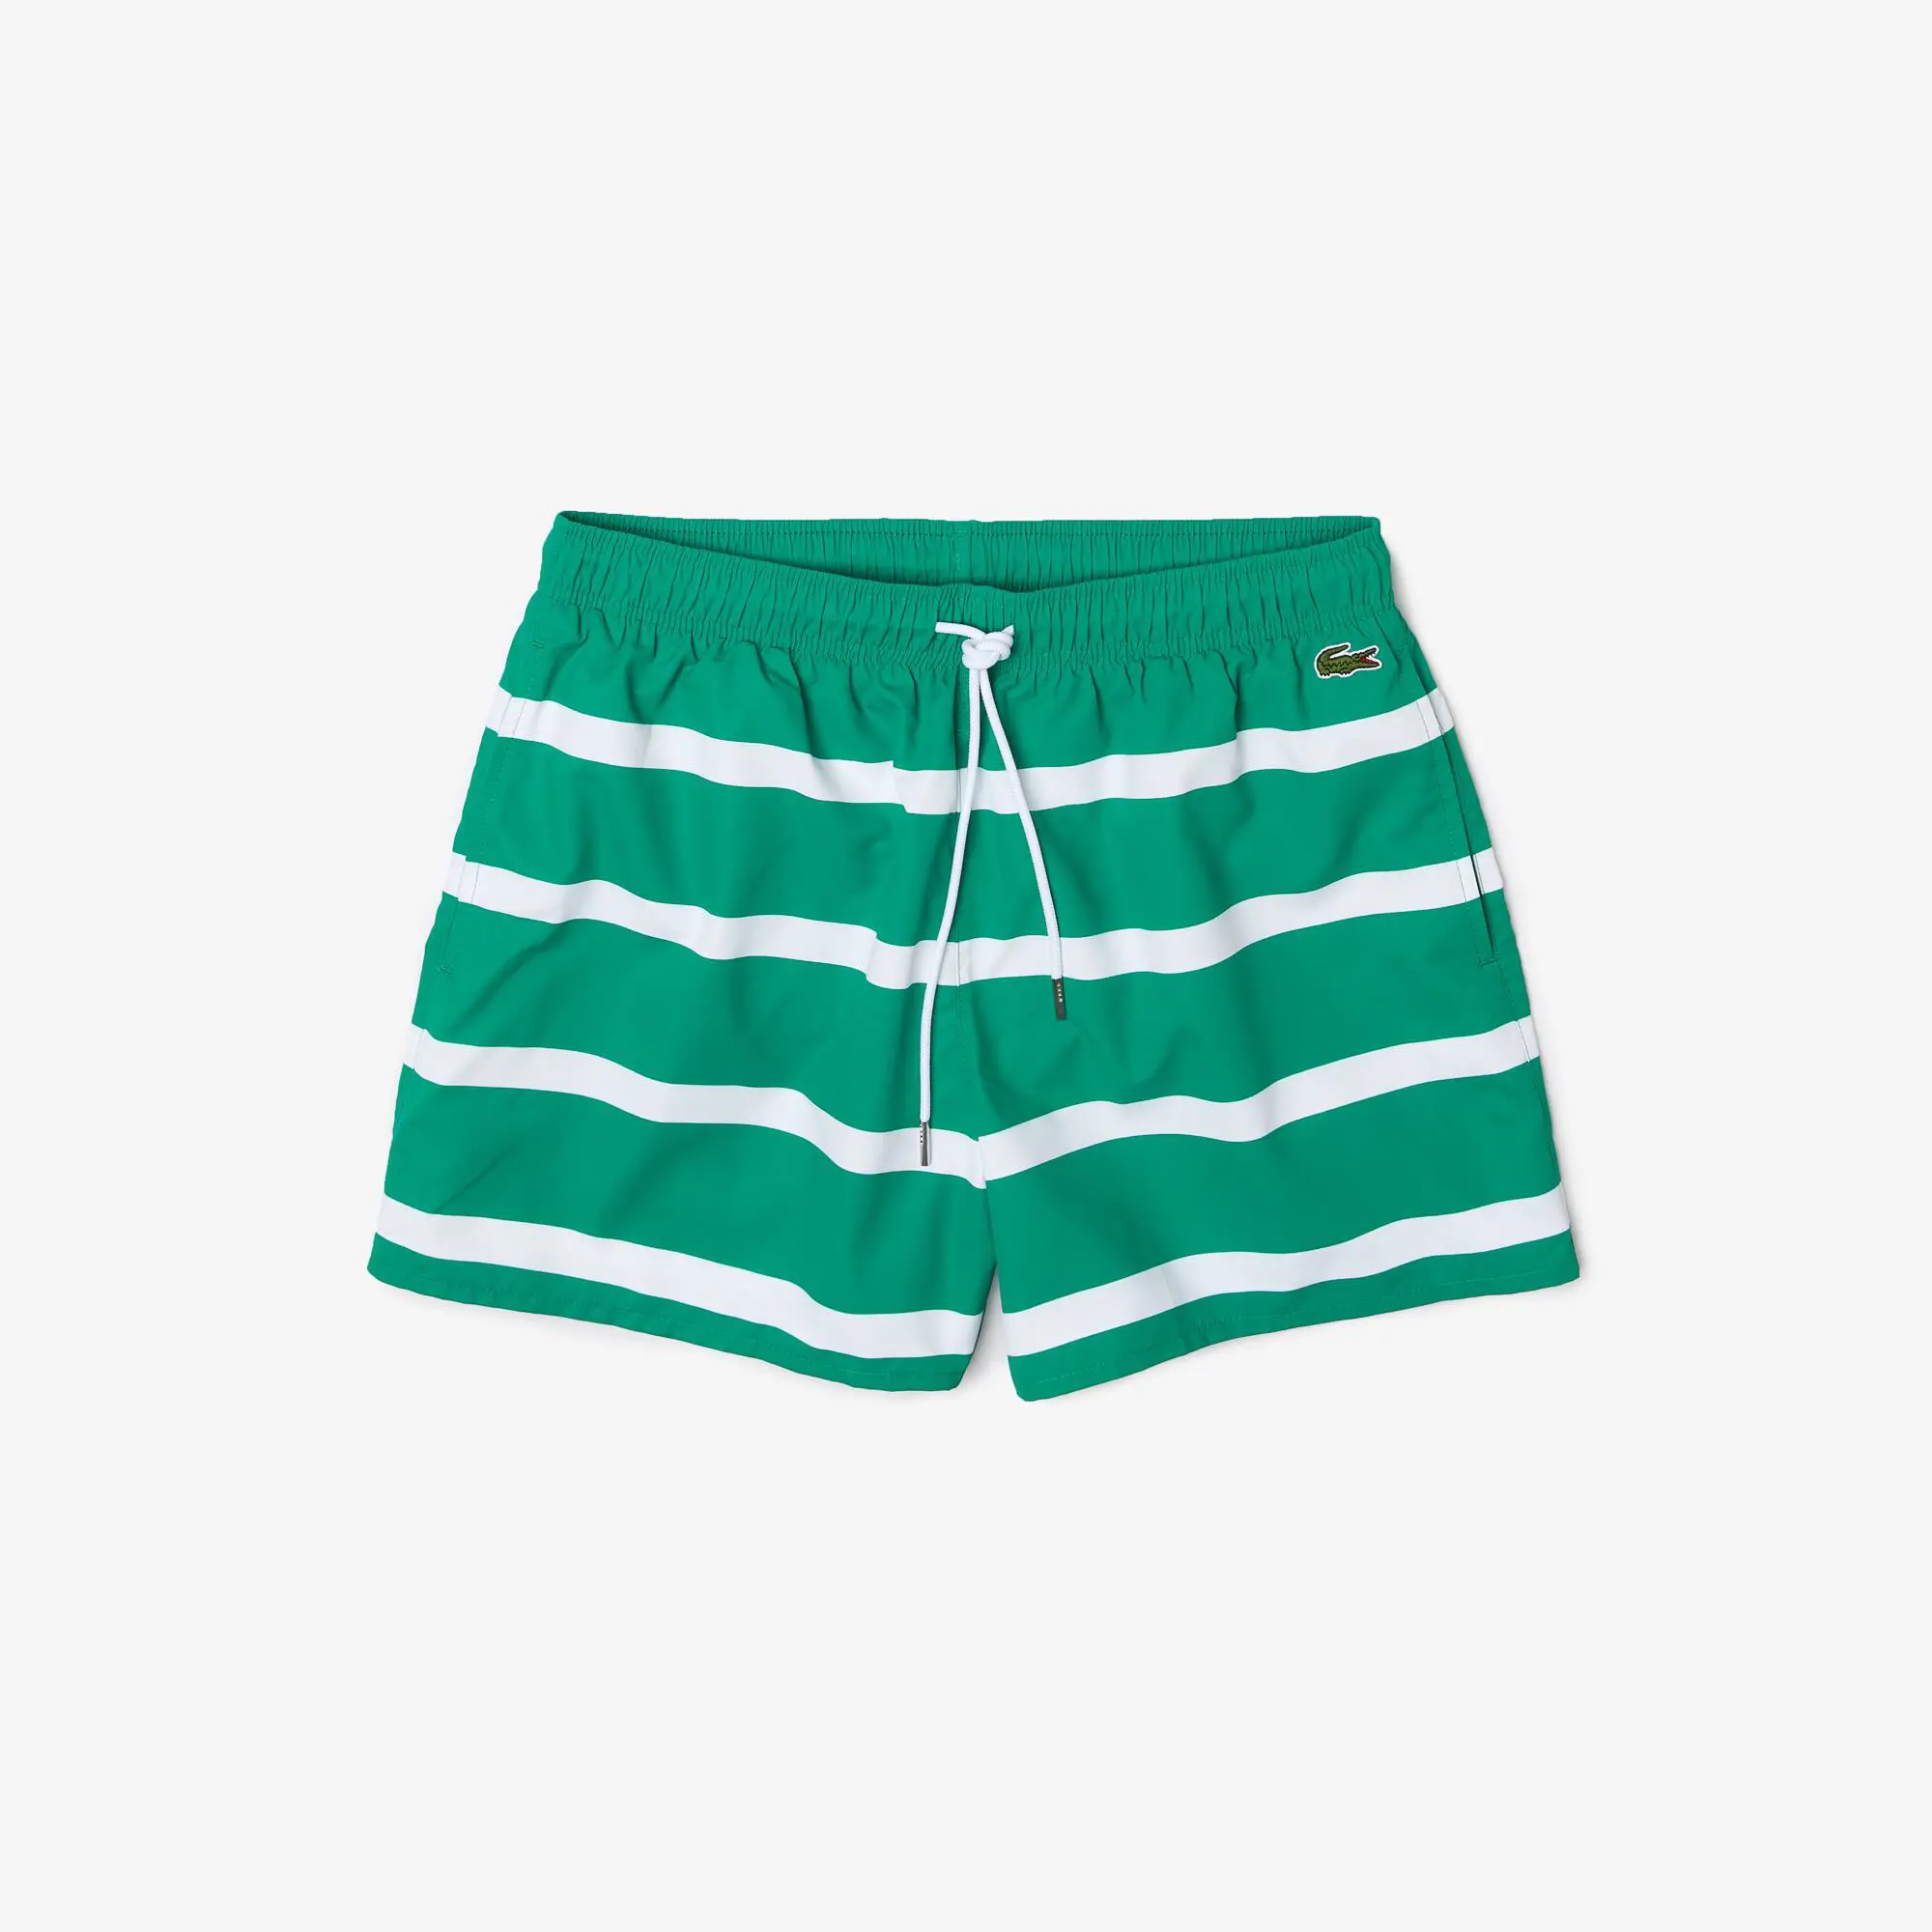 Lacoste Men's Striped And Embroidered Light Swimming Trunks. 2